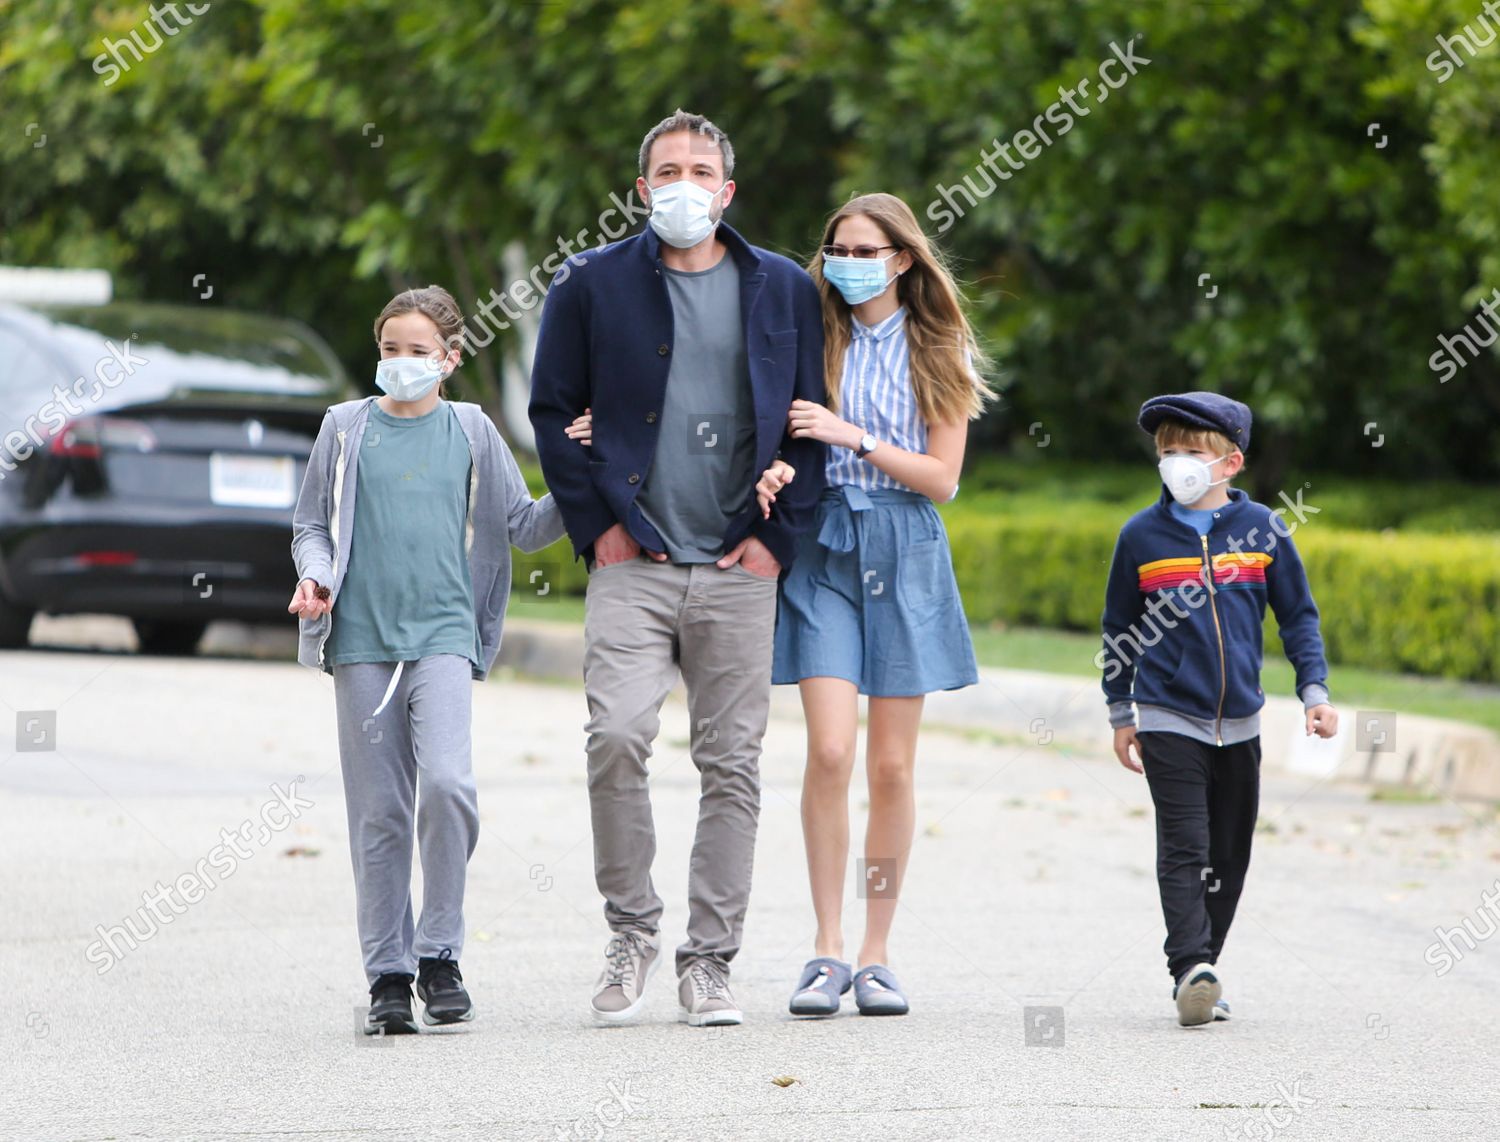 https://editorial01.shutterstock.com/wm-preview-1500/10617780i/f2a41aab/ben-affleck-and-kids-out-and-about-los-angeles-usa-shutterstock-editorial-10617780i.jpg